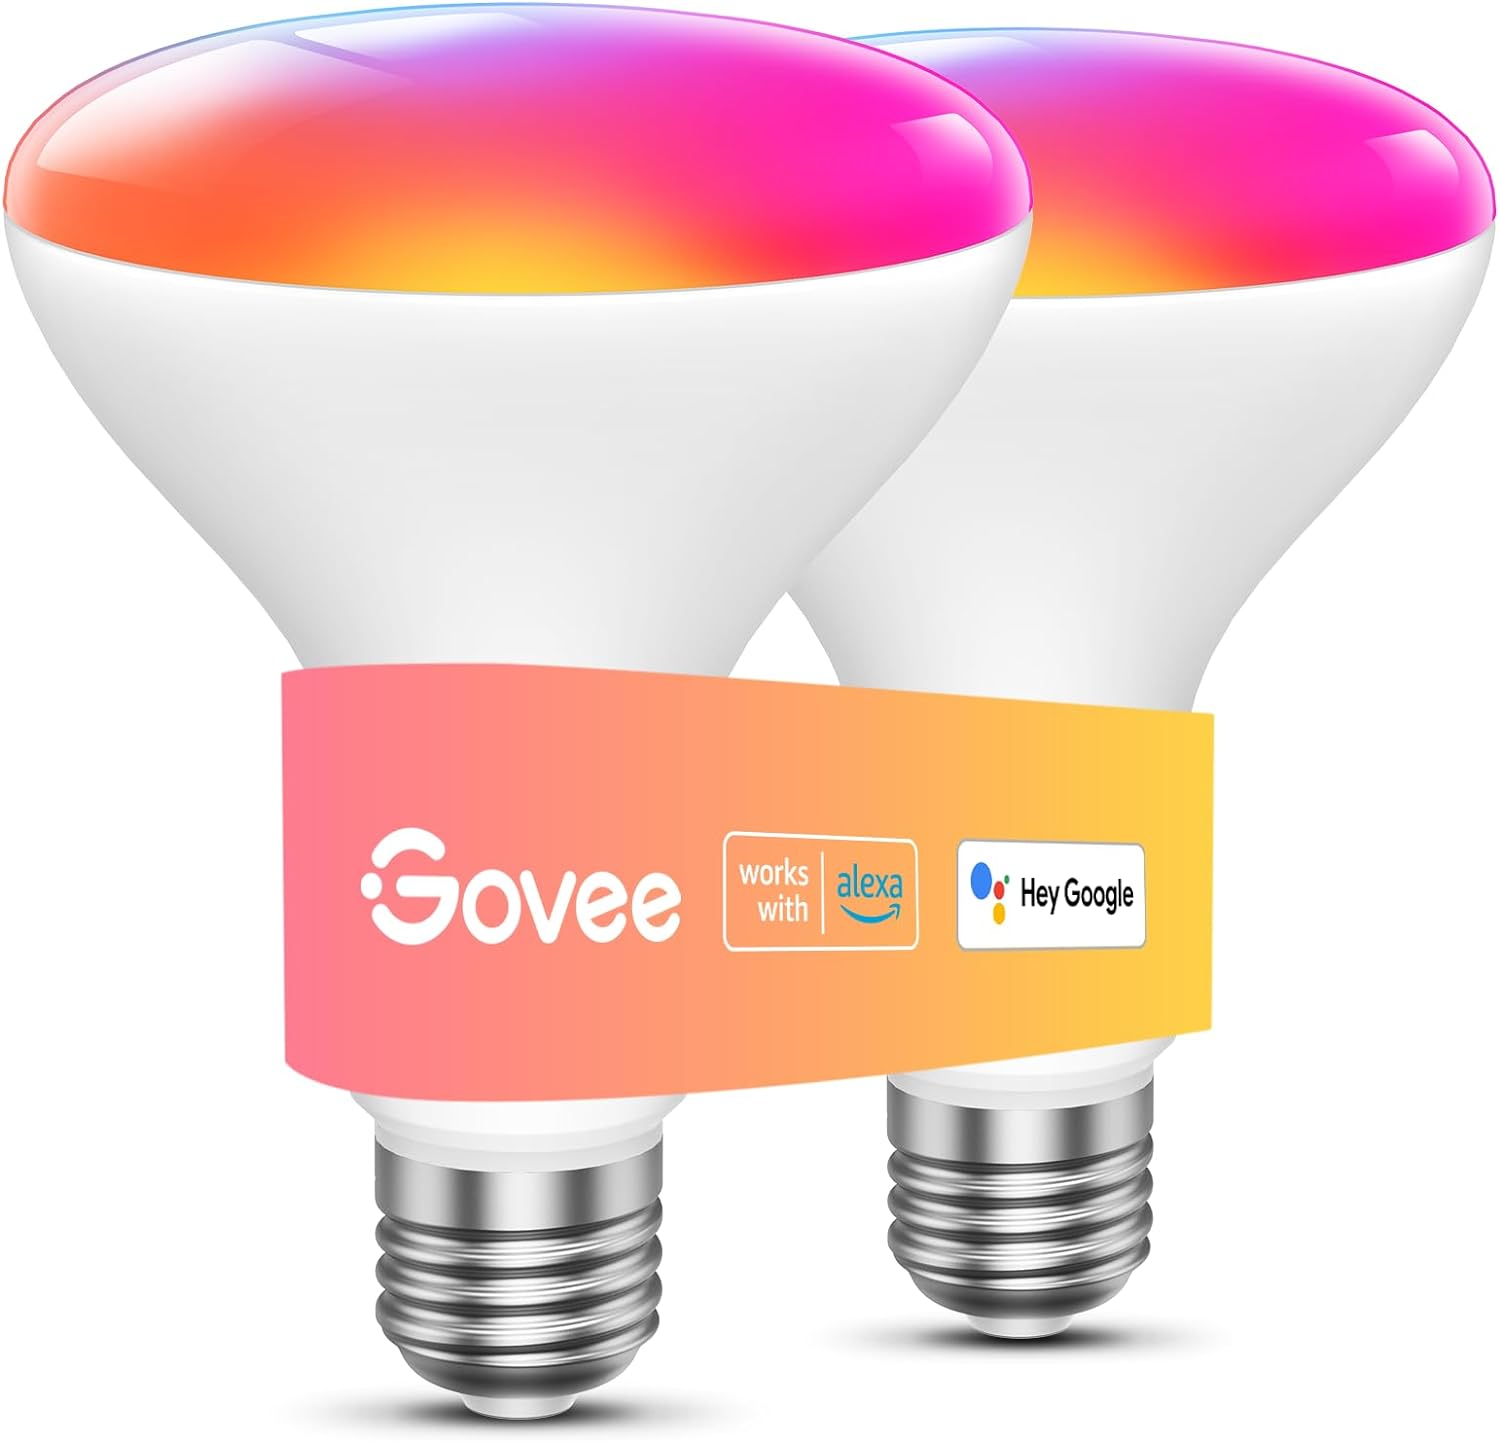 Govee Smart Light Bulbs, 1200 Lumens Dimmable BR30 Bulbs, RGBWW Color Changing Light Bulbs, WiFi & Bluetooth LED Bulbs, 16 Million Colors, Music Sync, Compatible with Alexa, Google Assistant, 2 Pack